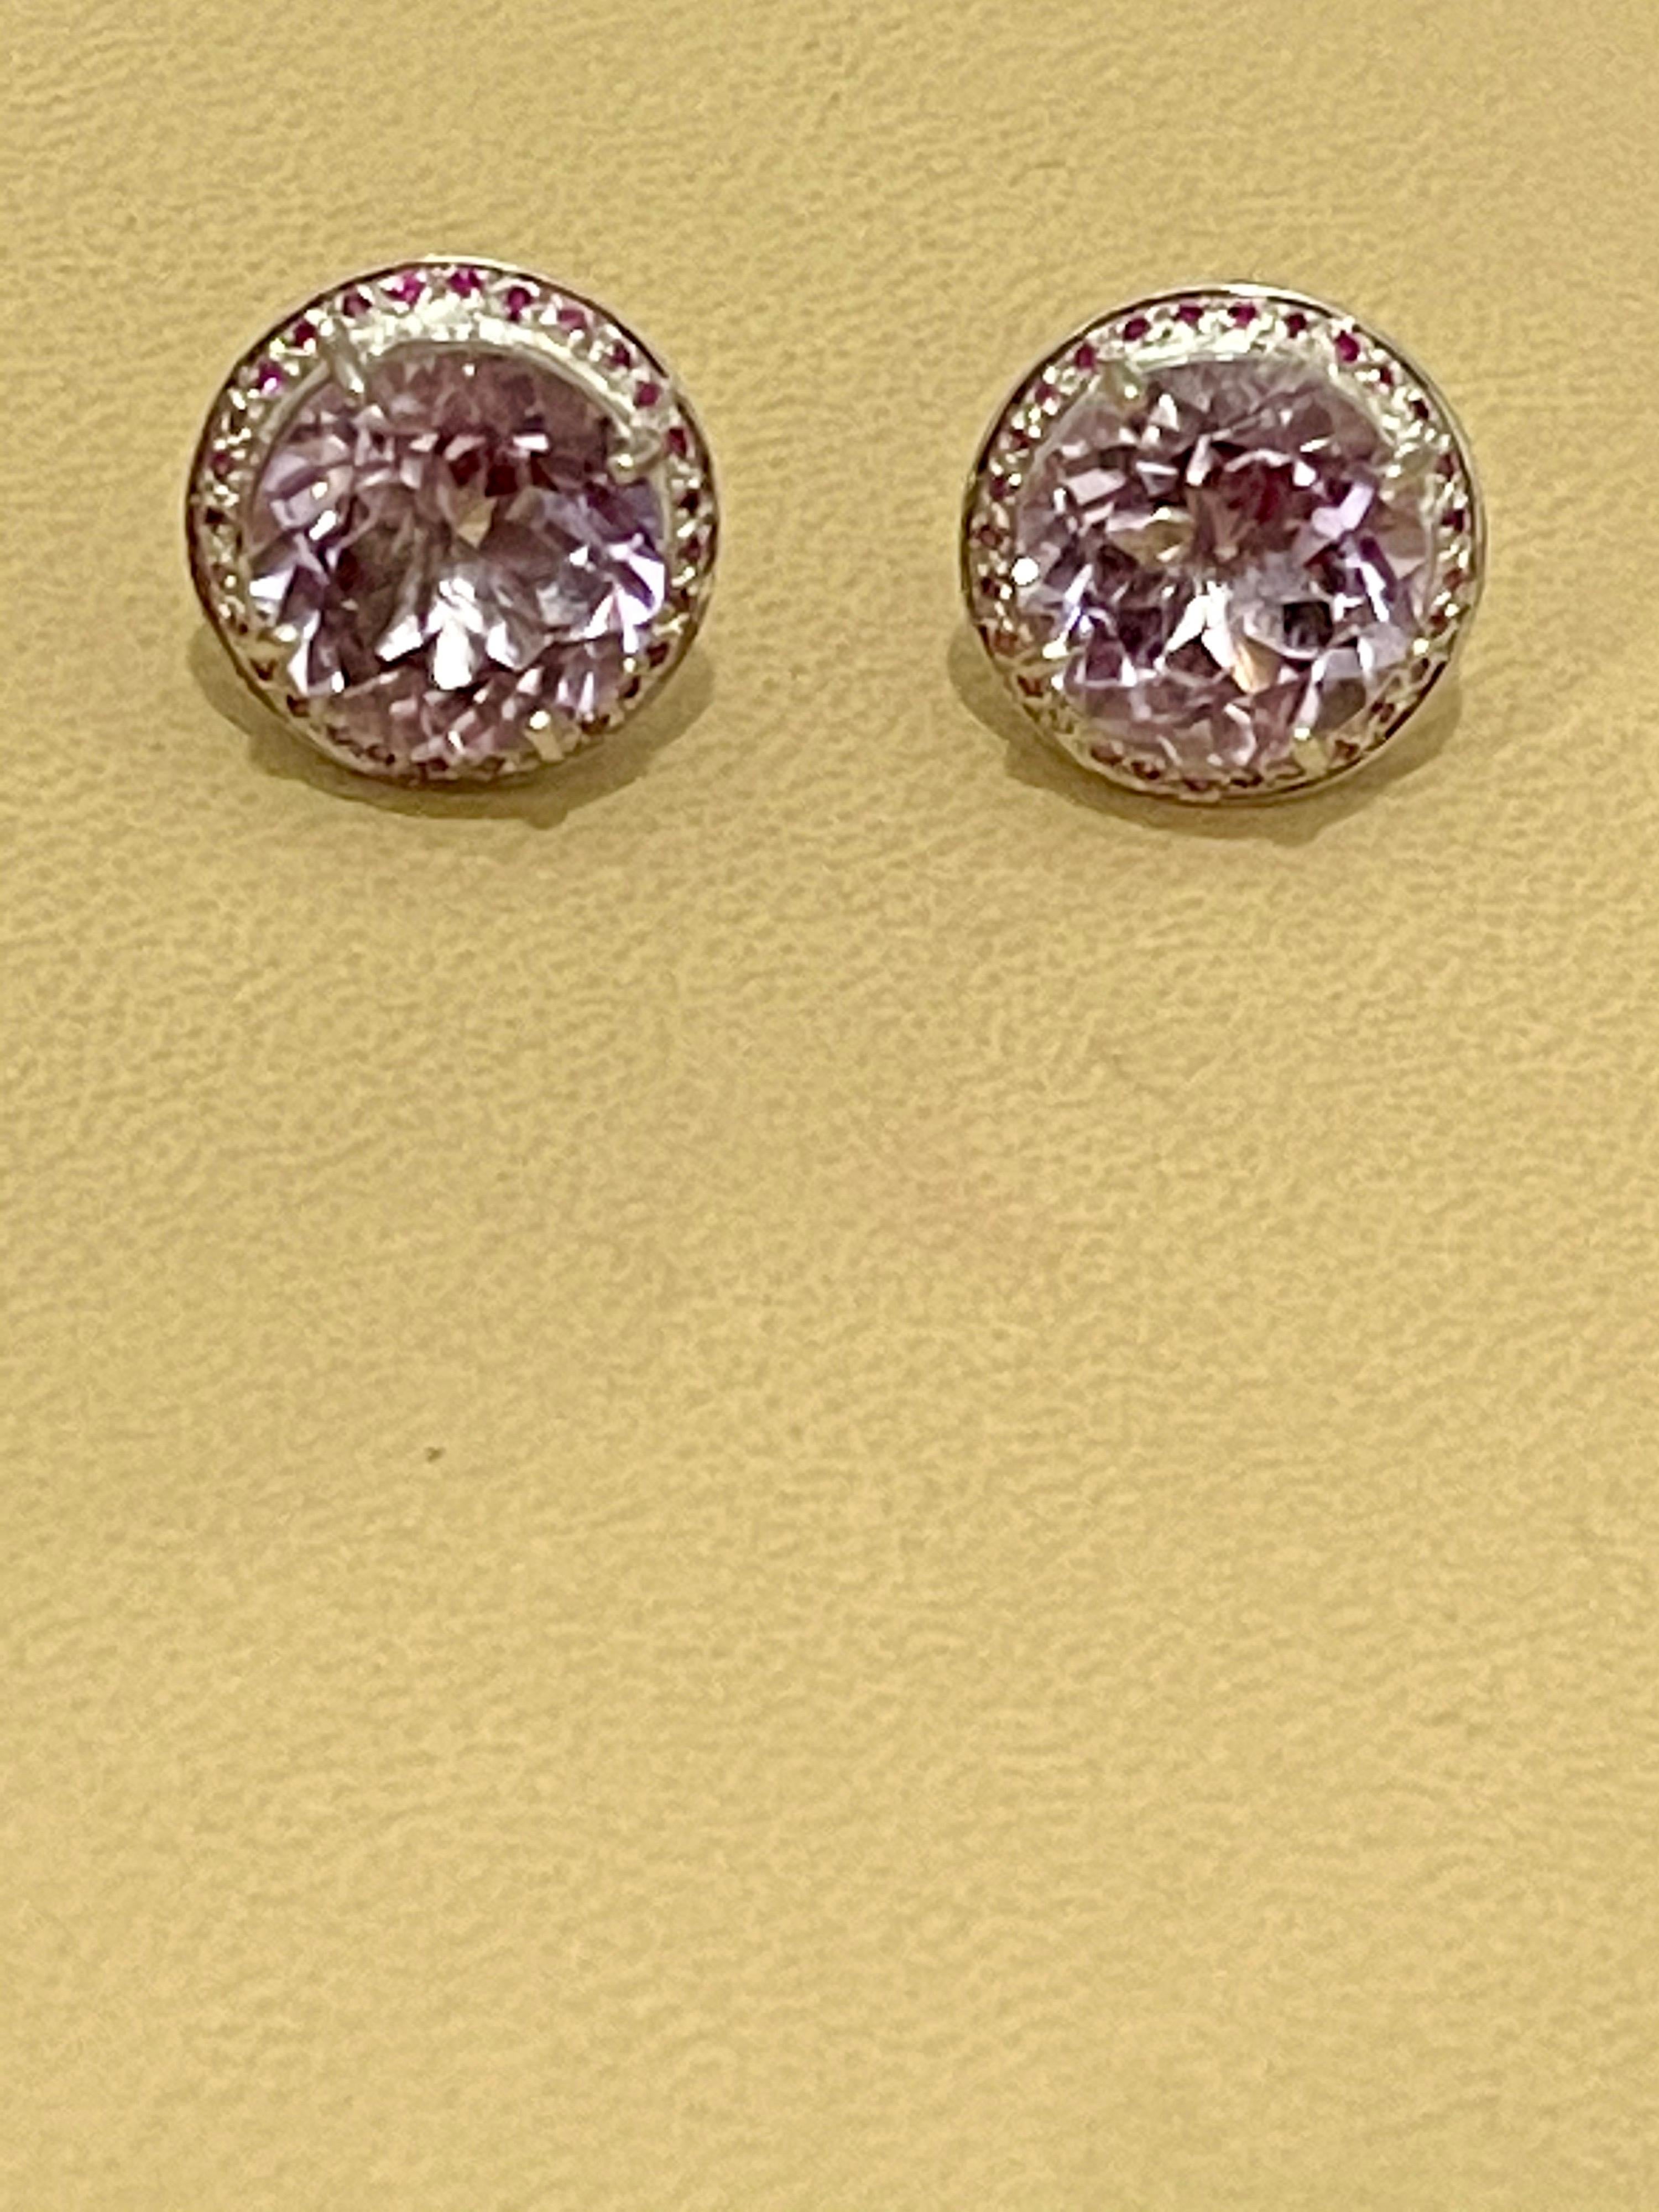 approximately 24 Ct Round Natural  Pink Amethyst Earrings 18 Karat White Gold  Post Backs
The 18k gold case is accented with few round cut Rubies. This is a unique piece  and adds a touch of class to any outfit.
amazing quality of stones.
18-karat